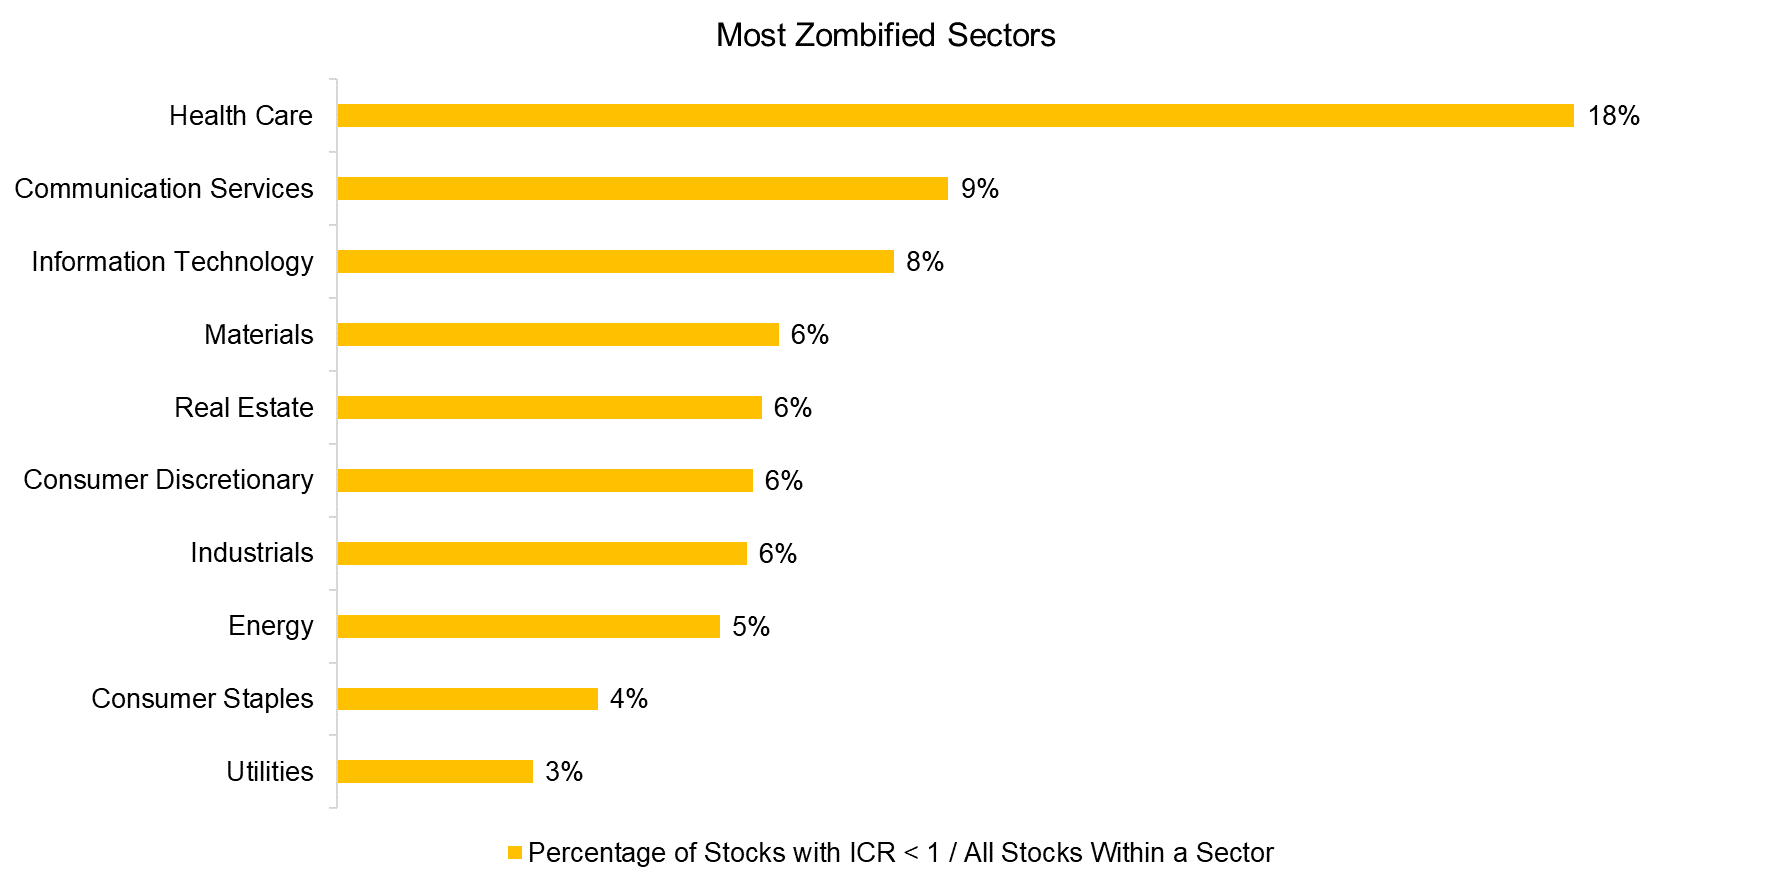 Most Zombified Sectors